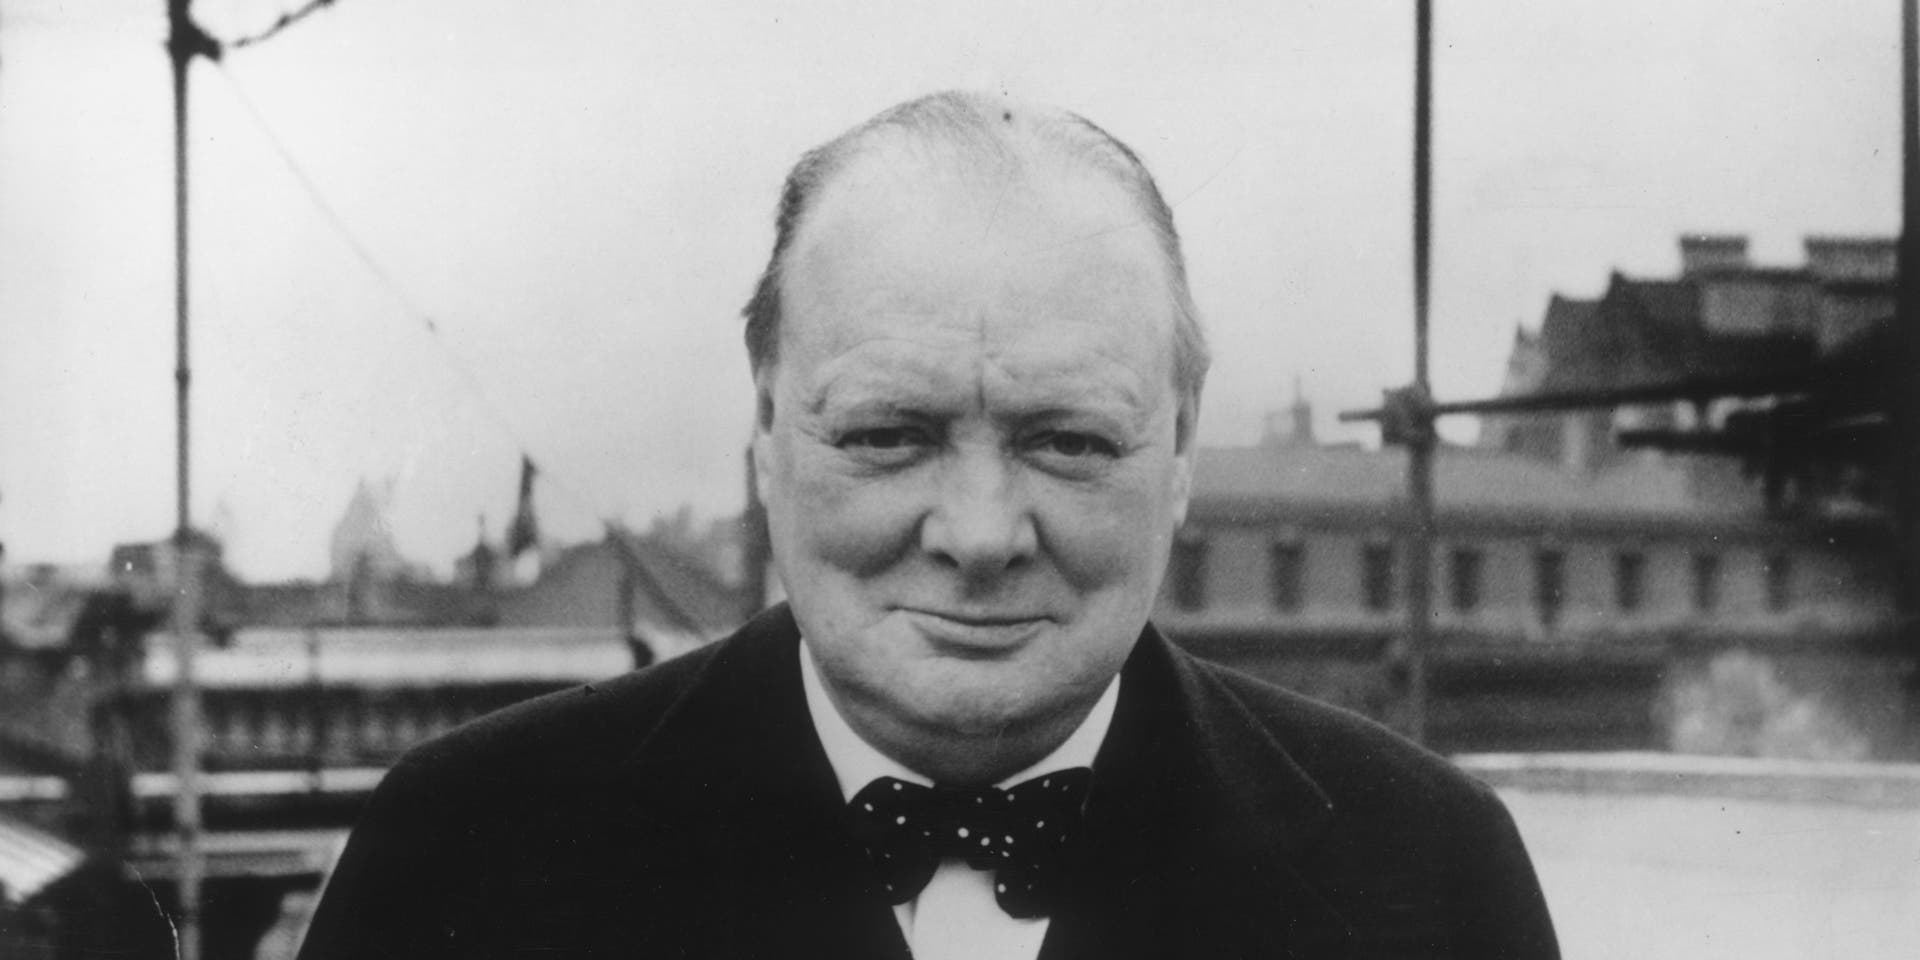 Churchill April 1939: British Conservative politician Winston Churchill. (Photo by Evening Standard/Getty Images)